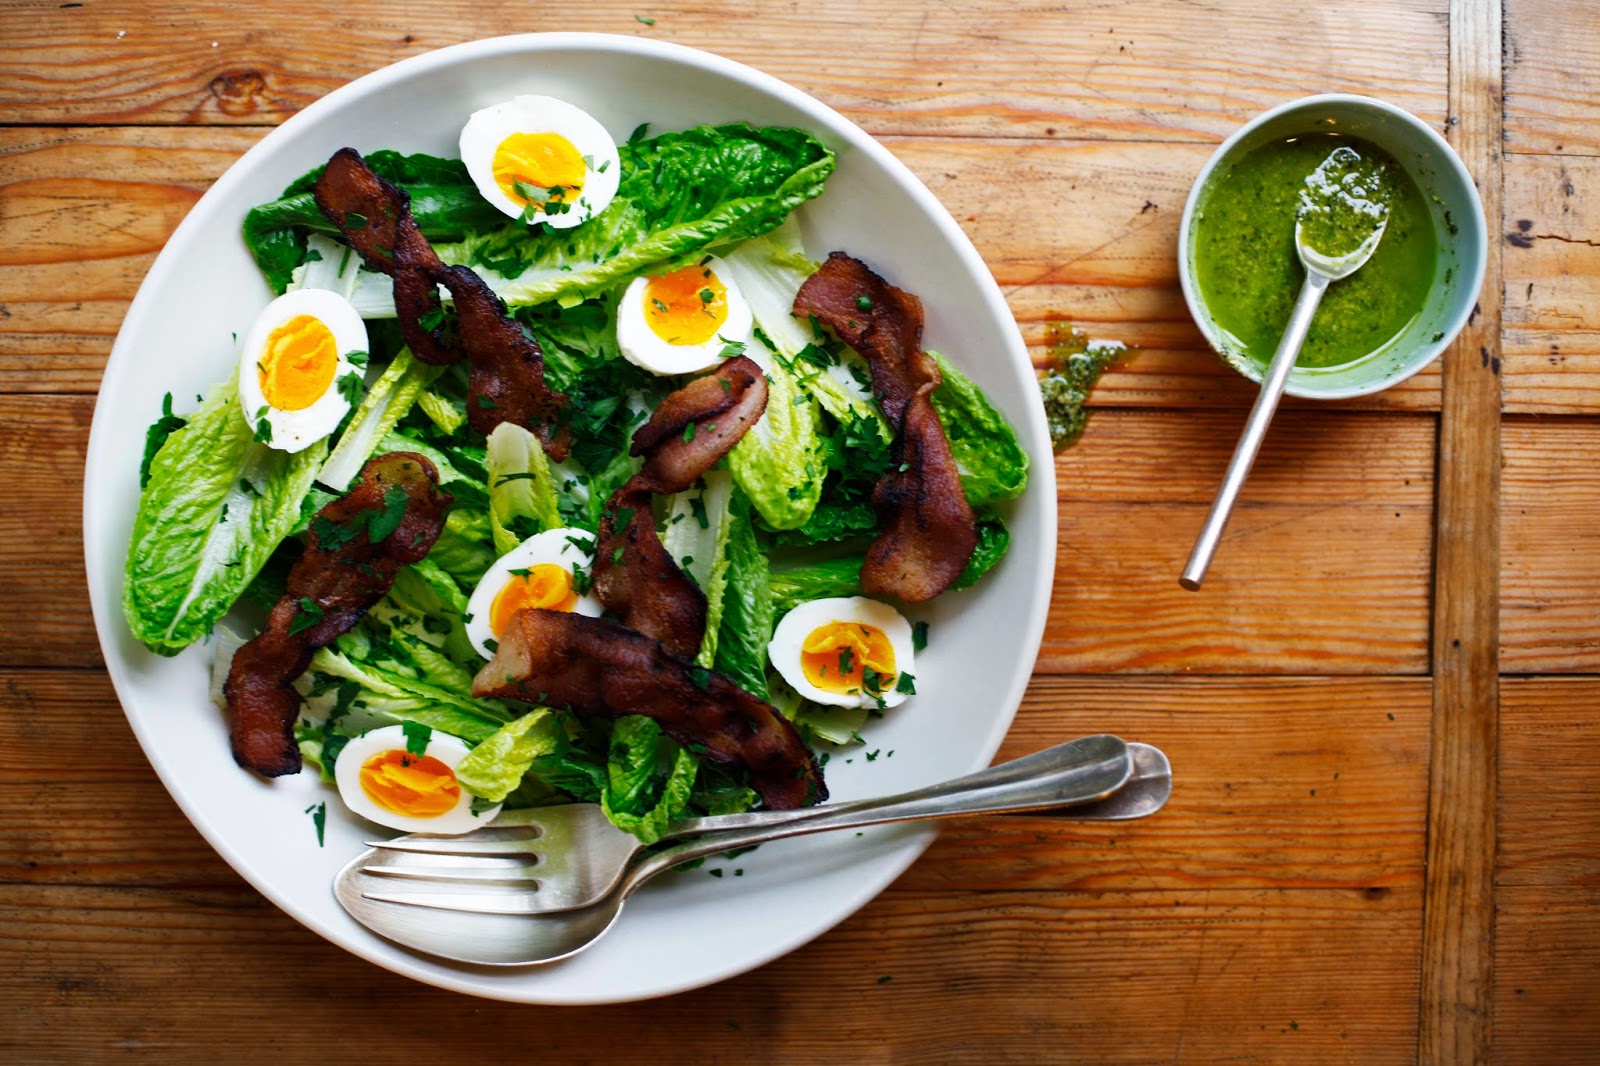 https://food52.com/blog/9863-romaine-salad-with-bacon-5-minute-eggs-and-pesto-dressing